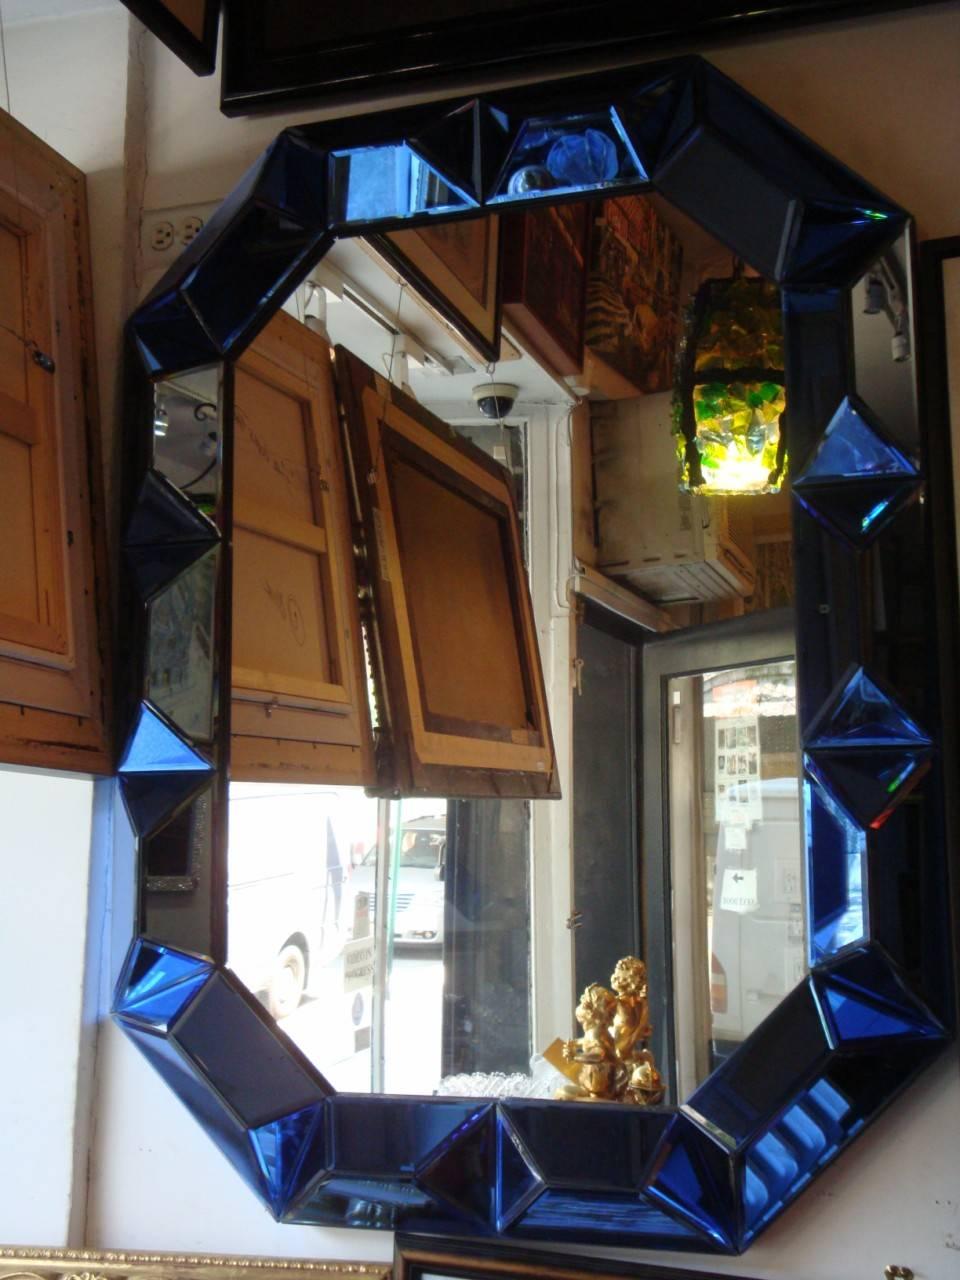 The following item we are offering is a rare important spectacular large deluxe Kaleidoscope Venetian style cubistic prism mirror. Taken out of an important private collection. Can be hung vertically or horizontally

Measurements: 34